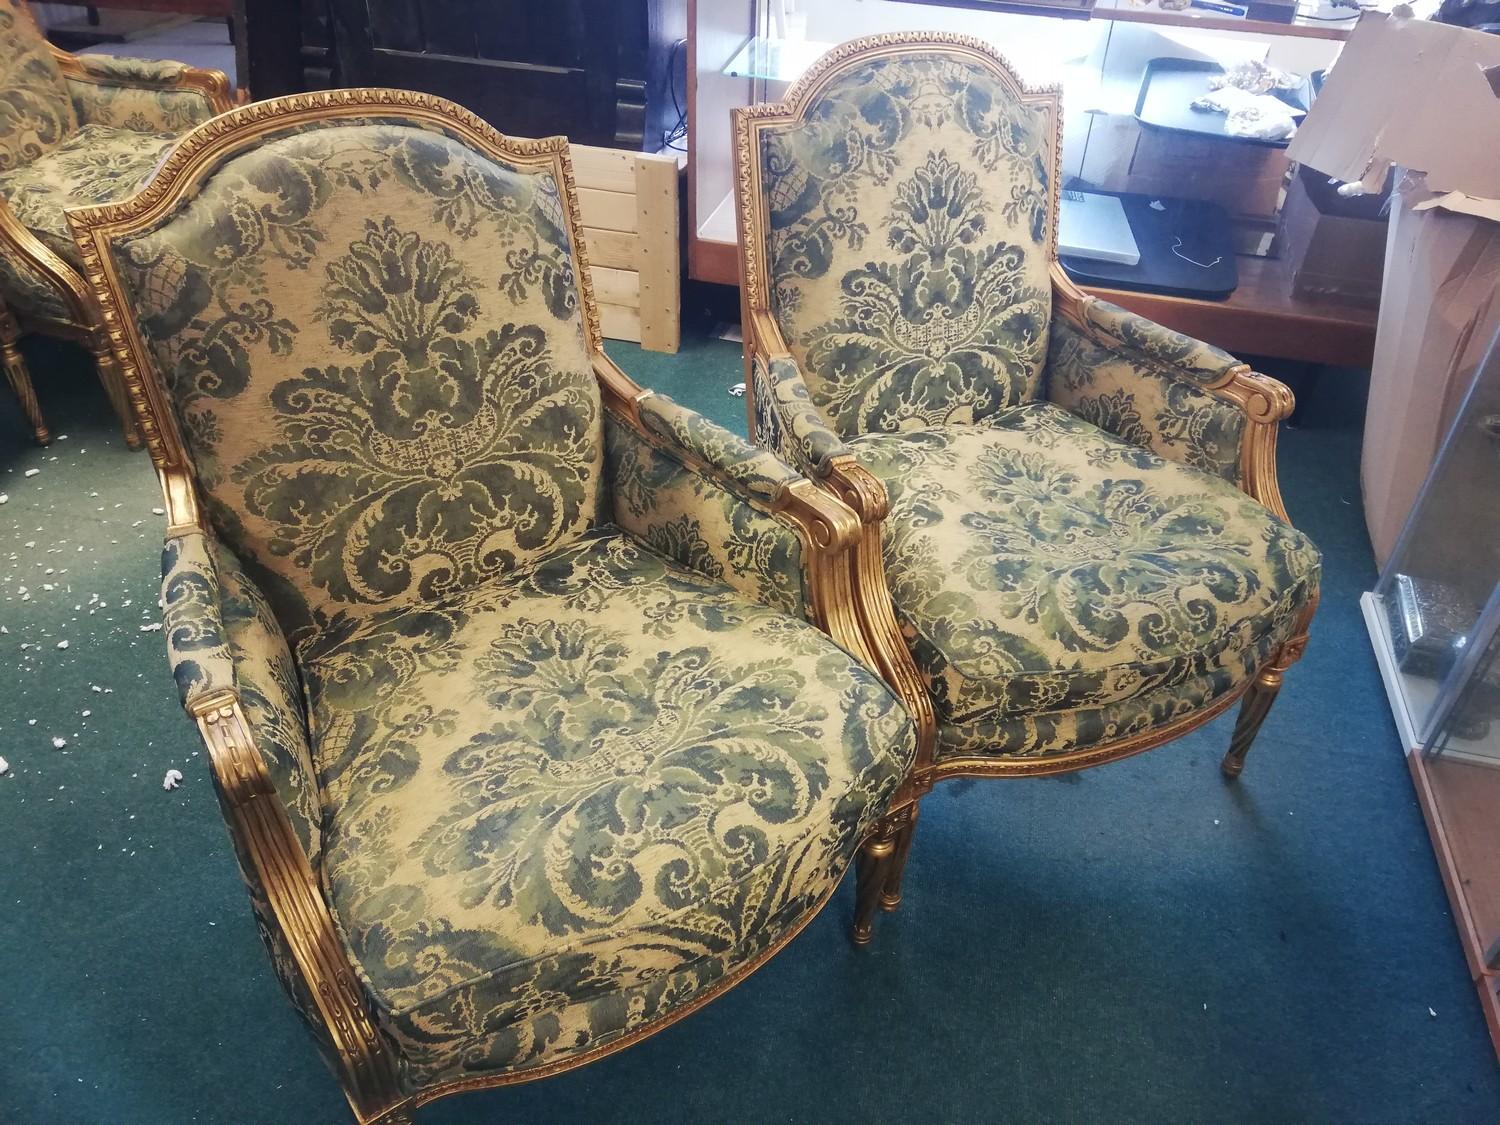 Pair of Brights of nettlebed gilt wood french armchairs with blue silk brocade upholstery